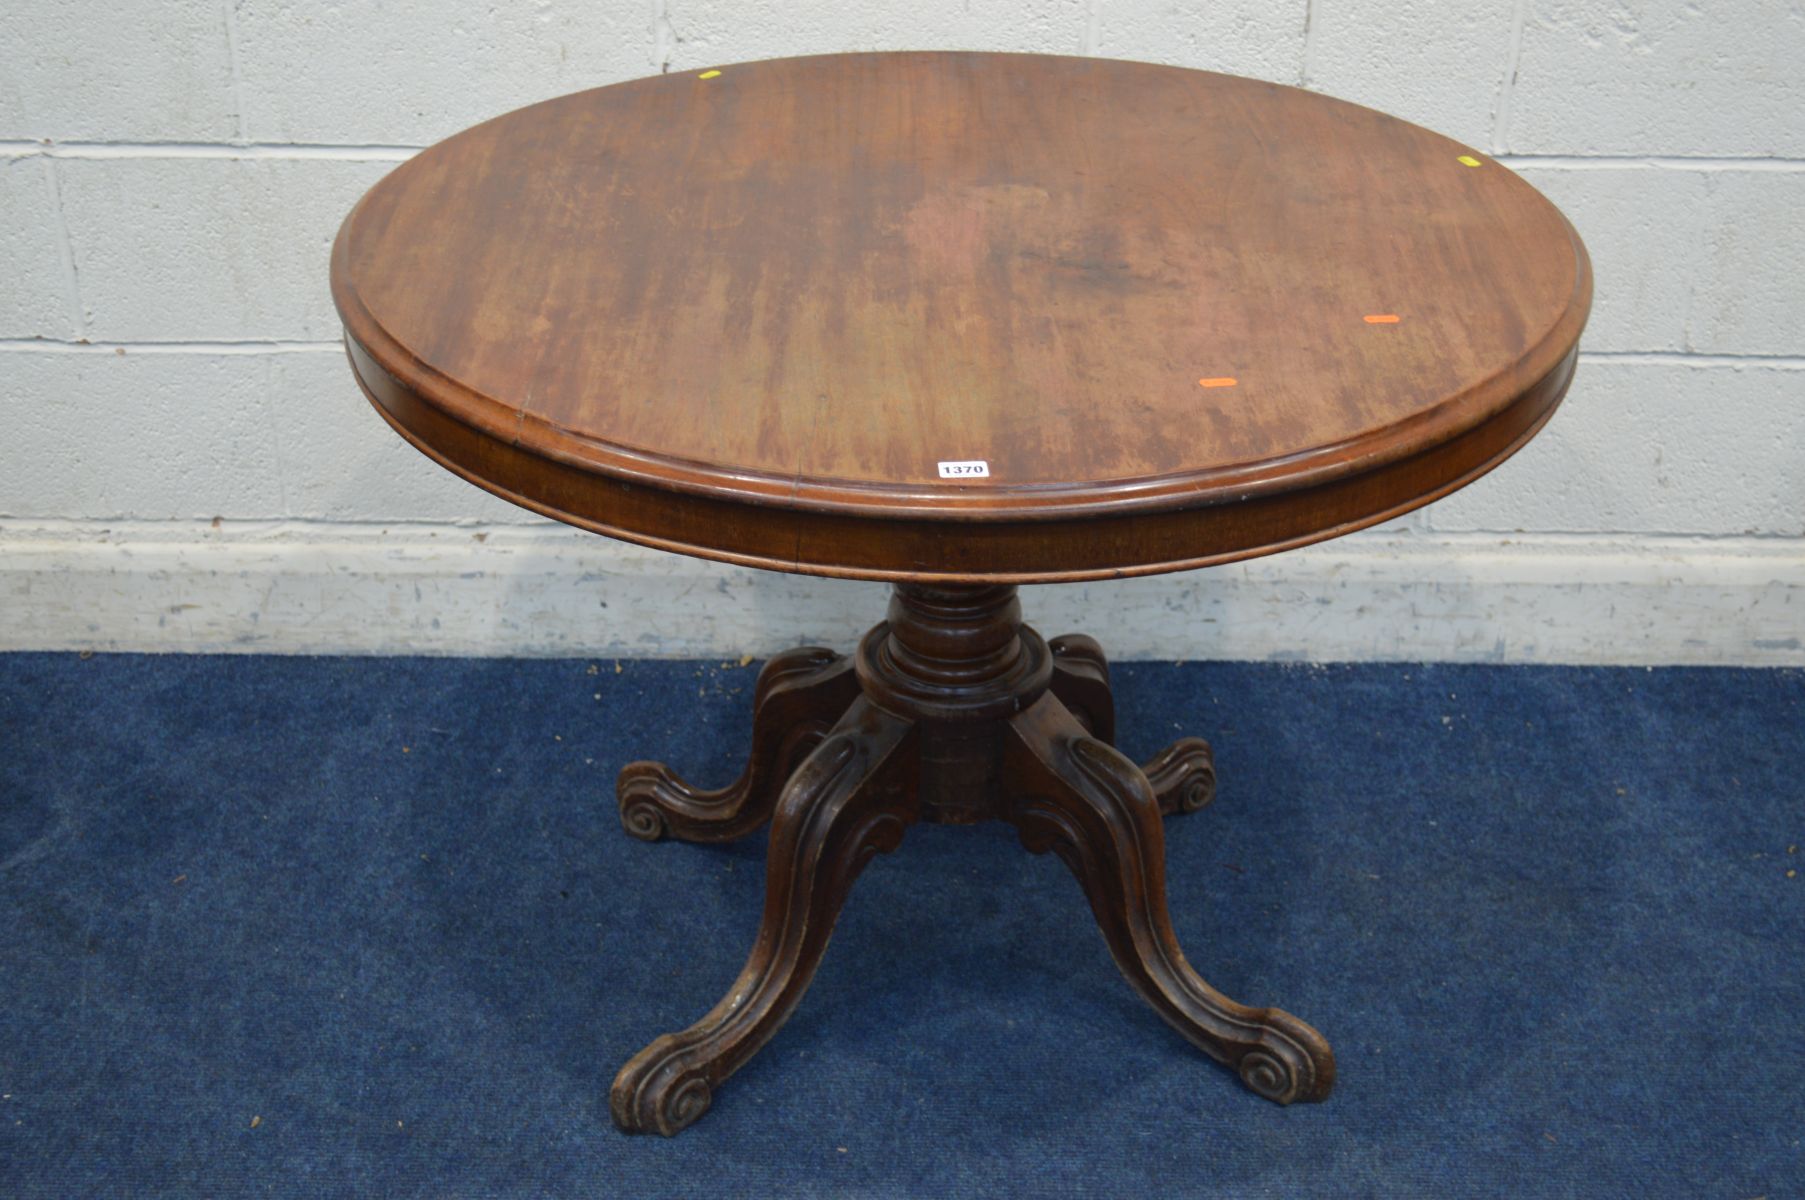 A LATE VICTORIAN WALNUT CIRCULAR BREAKFAST TABLE on a base with scrolled legs, diameter 102cm x - Image 3 of 3